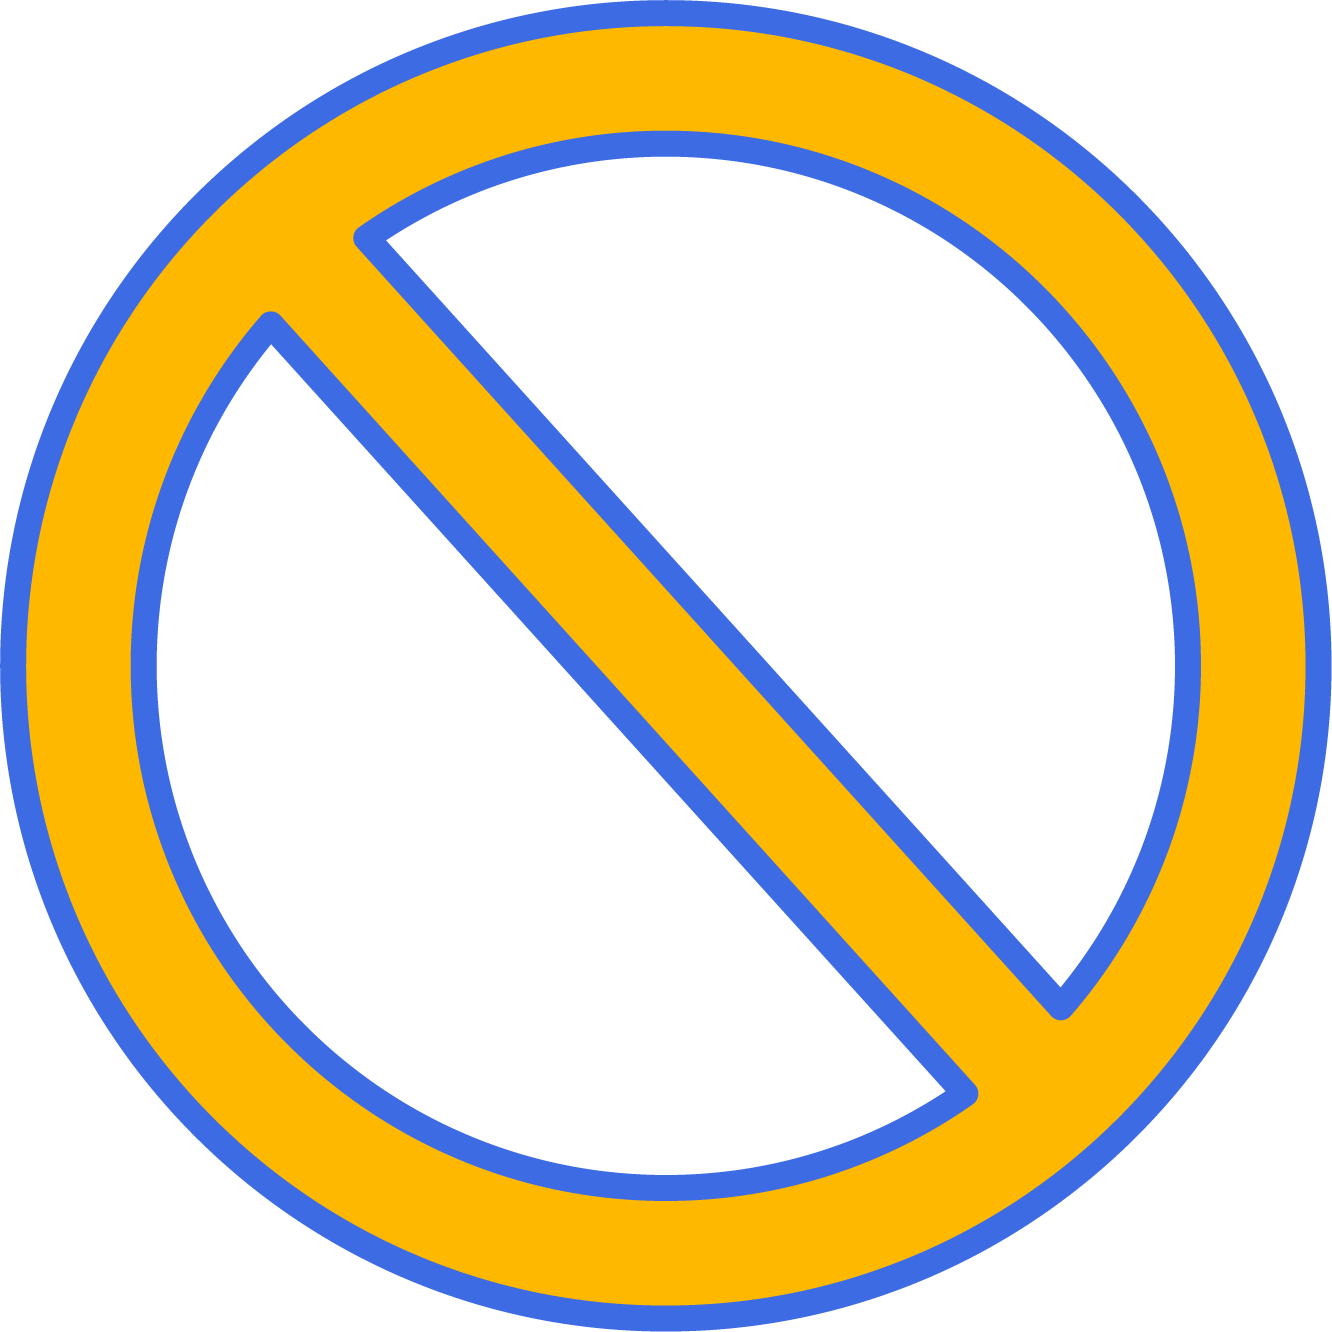 Yellow prohibited sign with blue borders